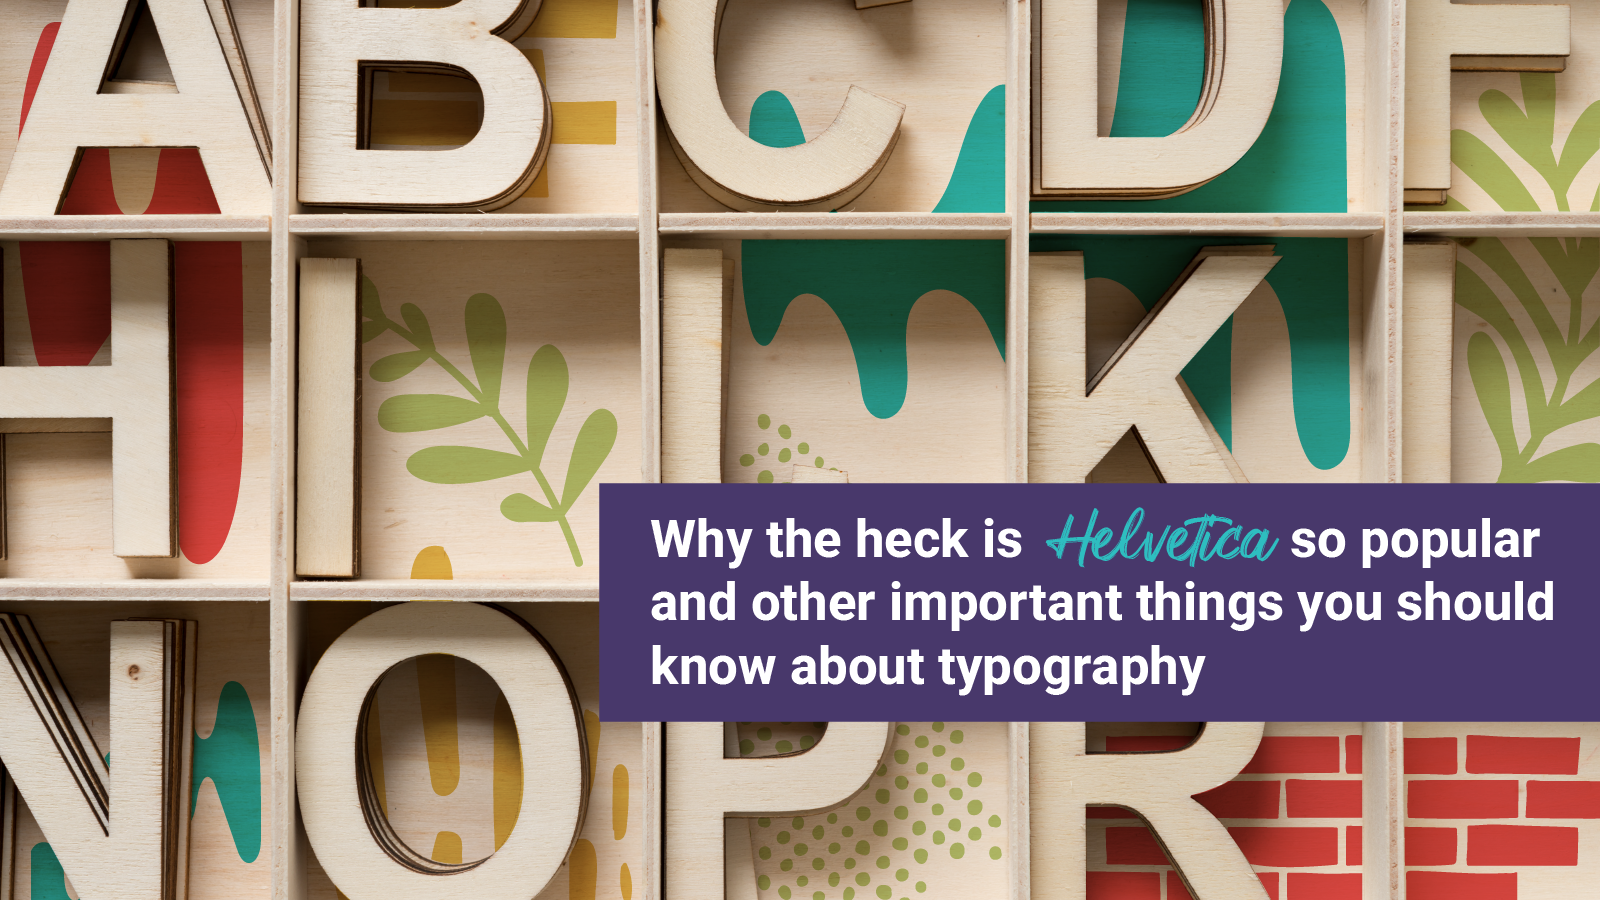 Why the heck is Helvetica so popular and other important things to know about typography"